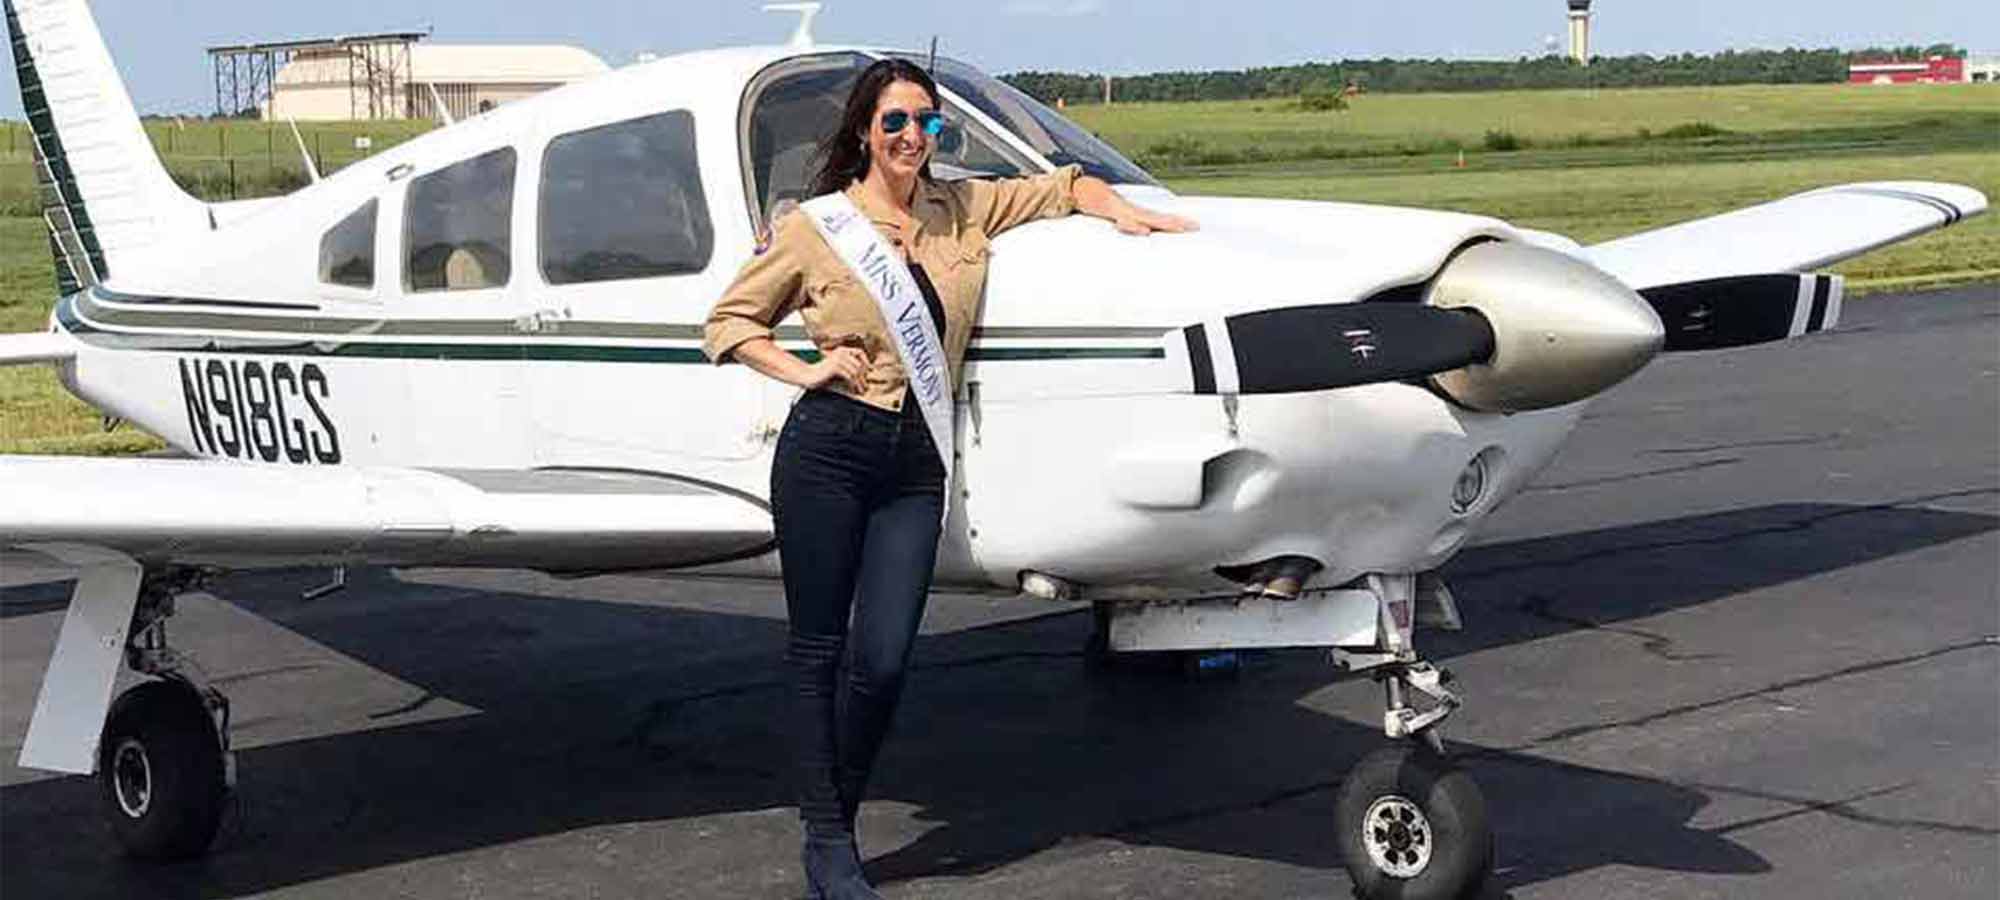 Vermont’s Erin Connor Became a New Voice for Aviation at Miss America